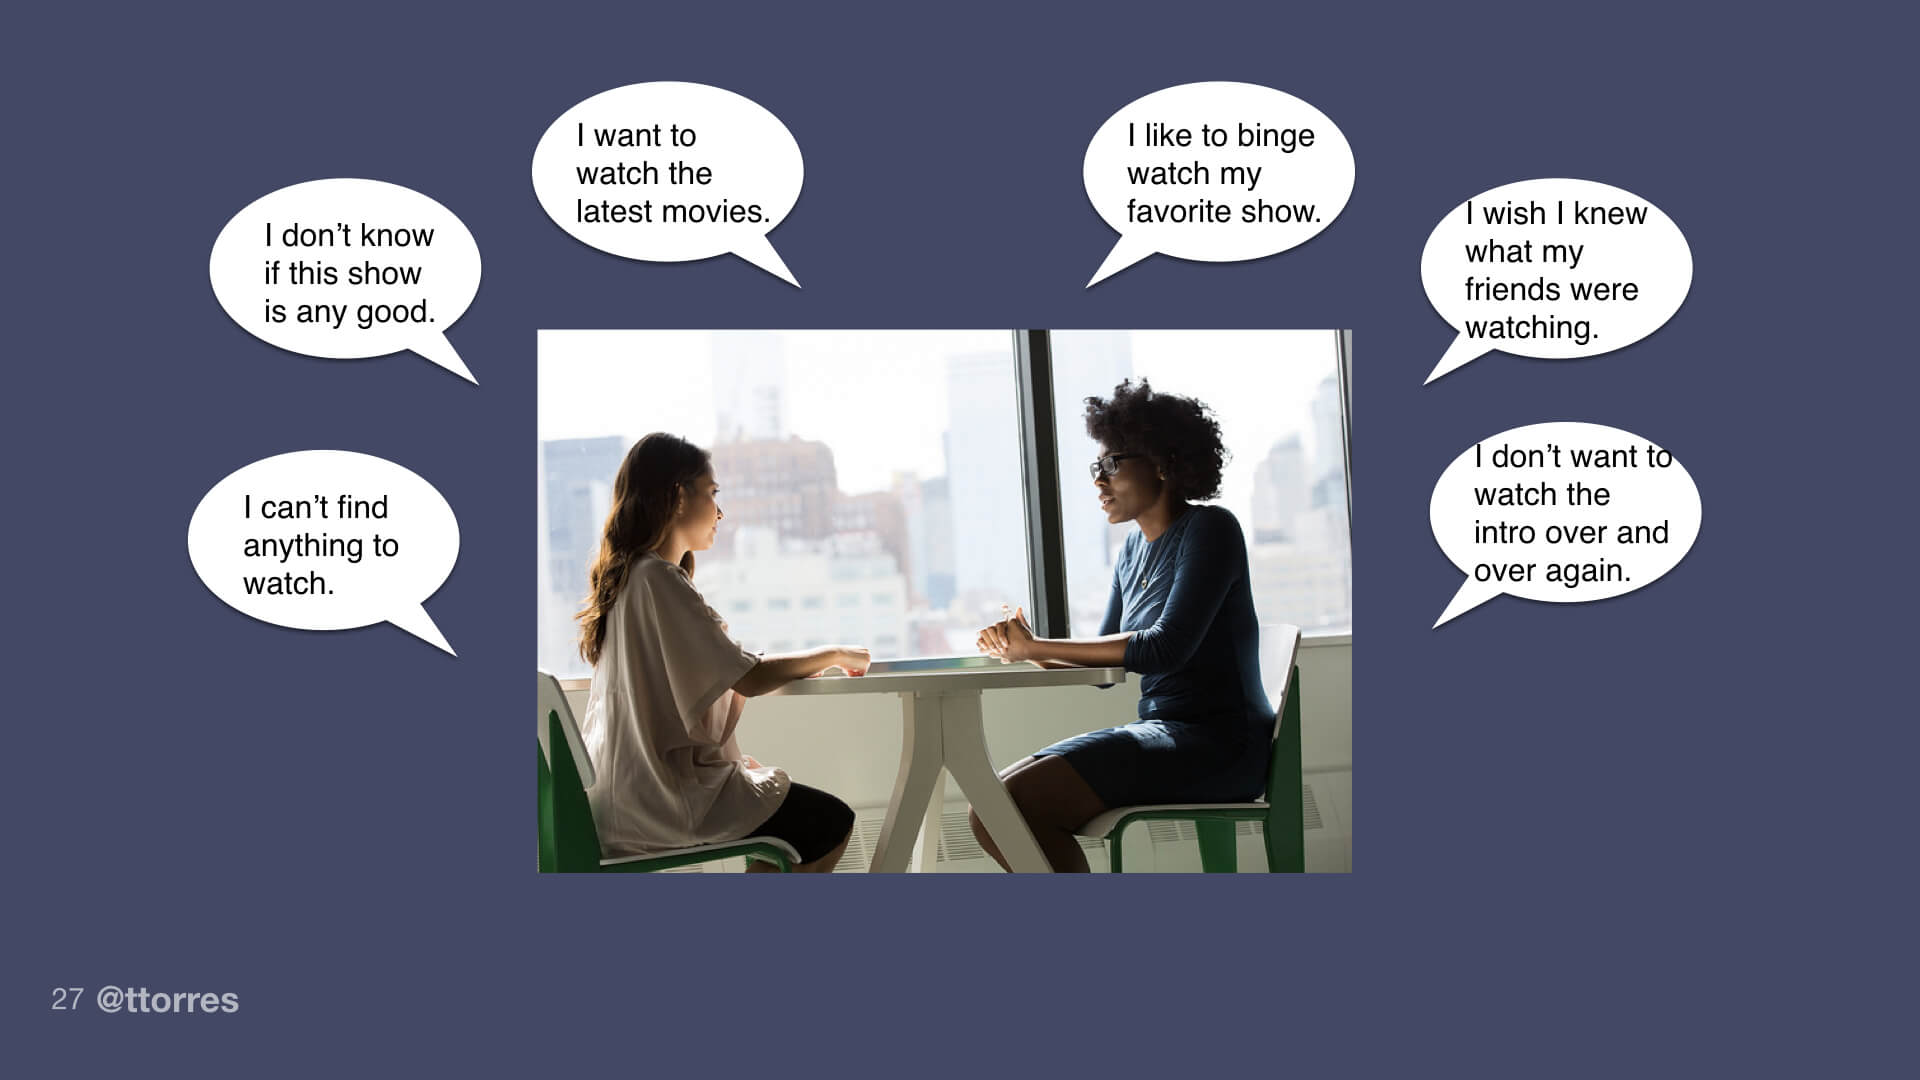 Two people sitting at a table and talking. Surrounding them are several thought bubbles describing many of the statements the customer is making about using Netflix.